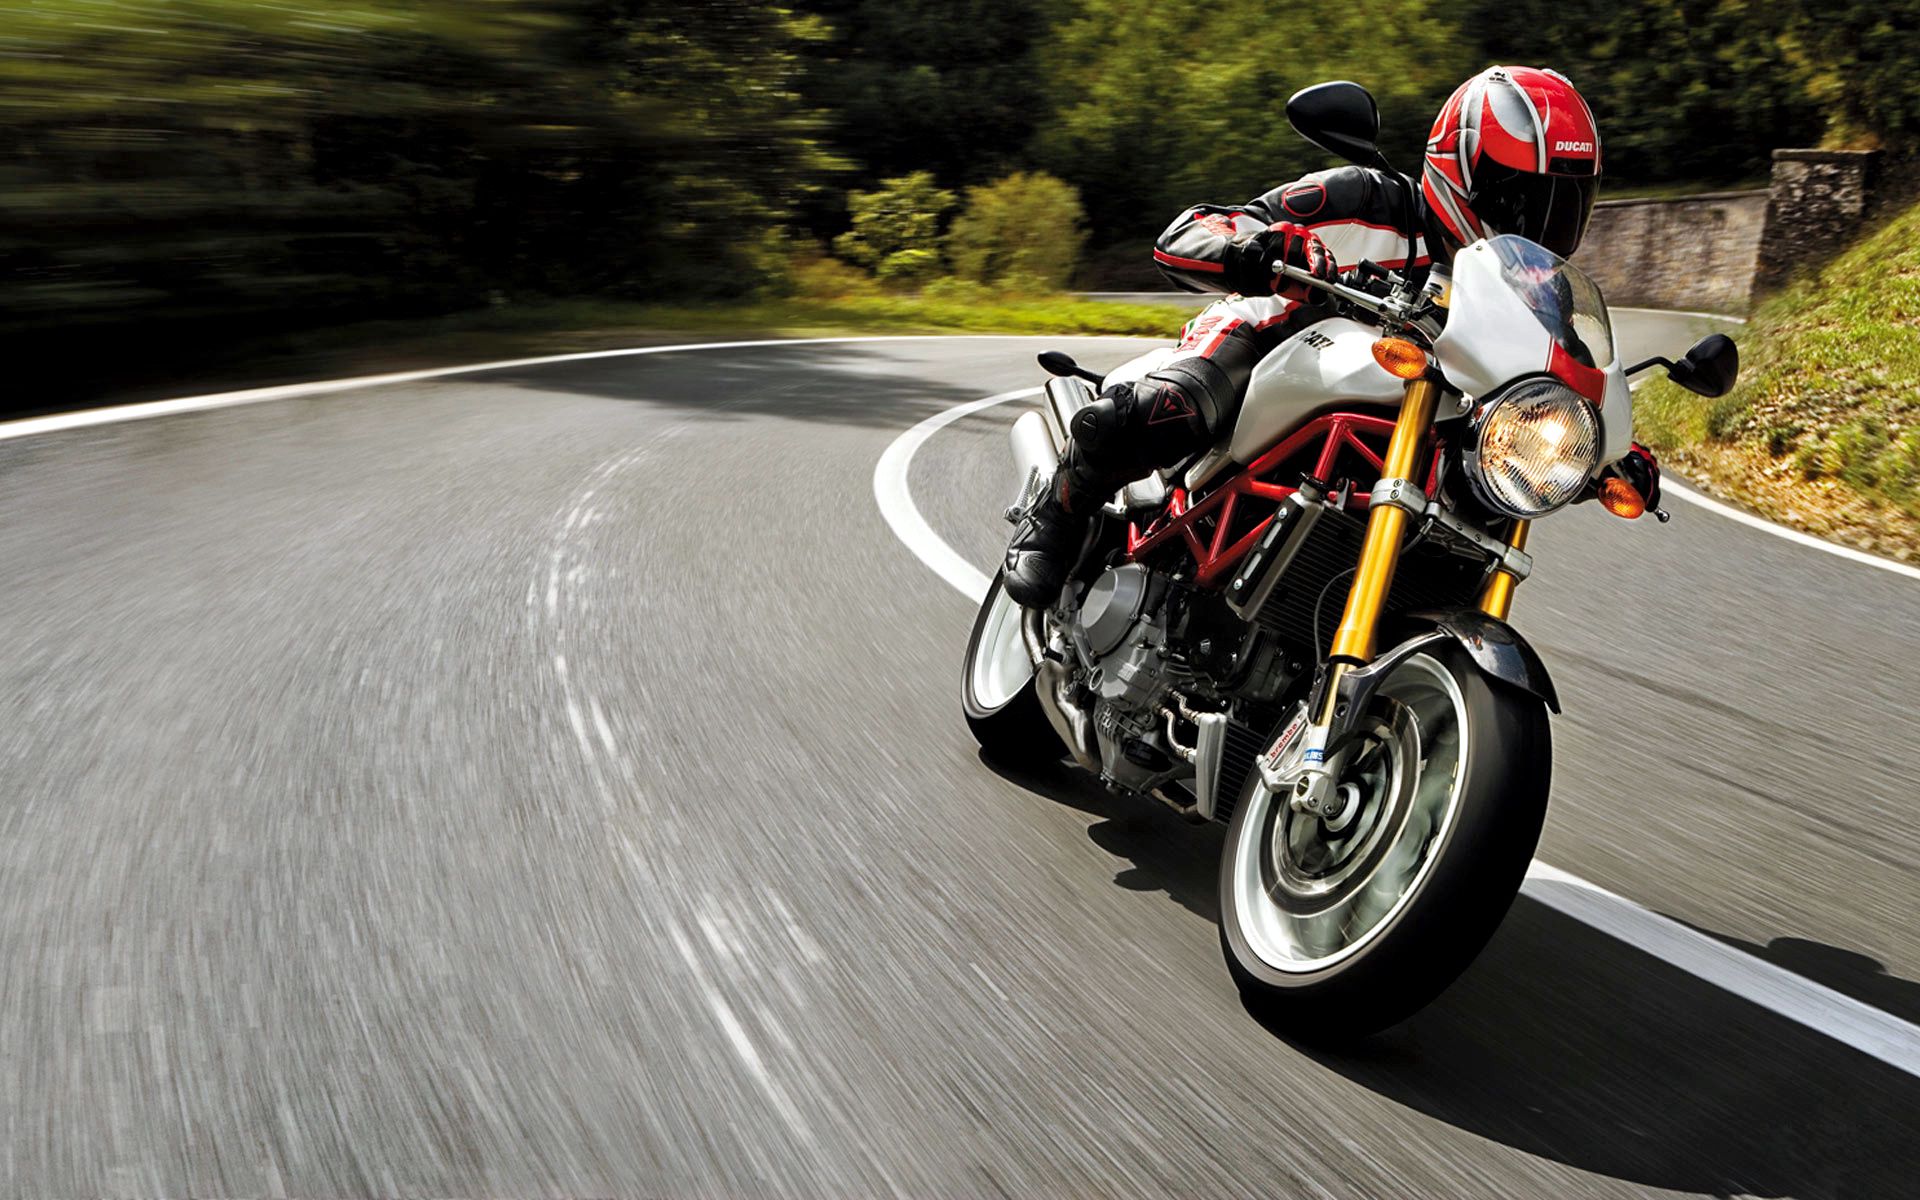 speed, motorcyclist, motorcycles, ducati, monster, s4r 1080p